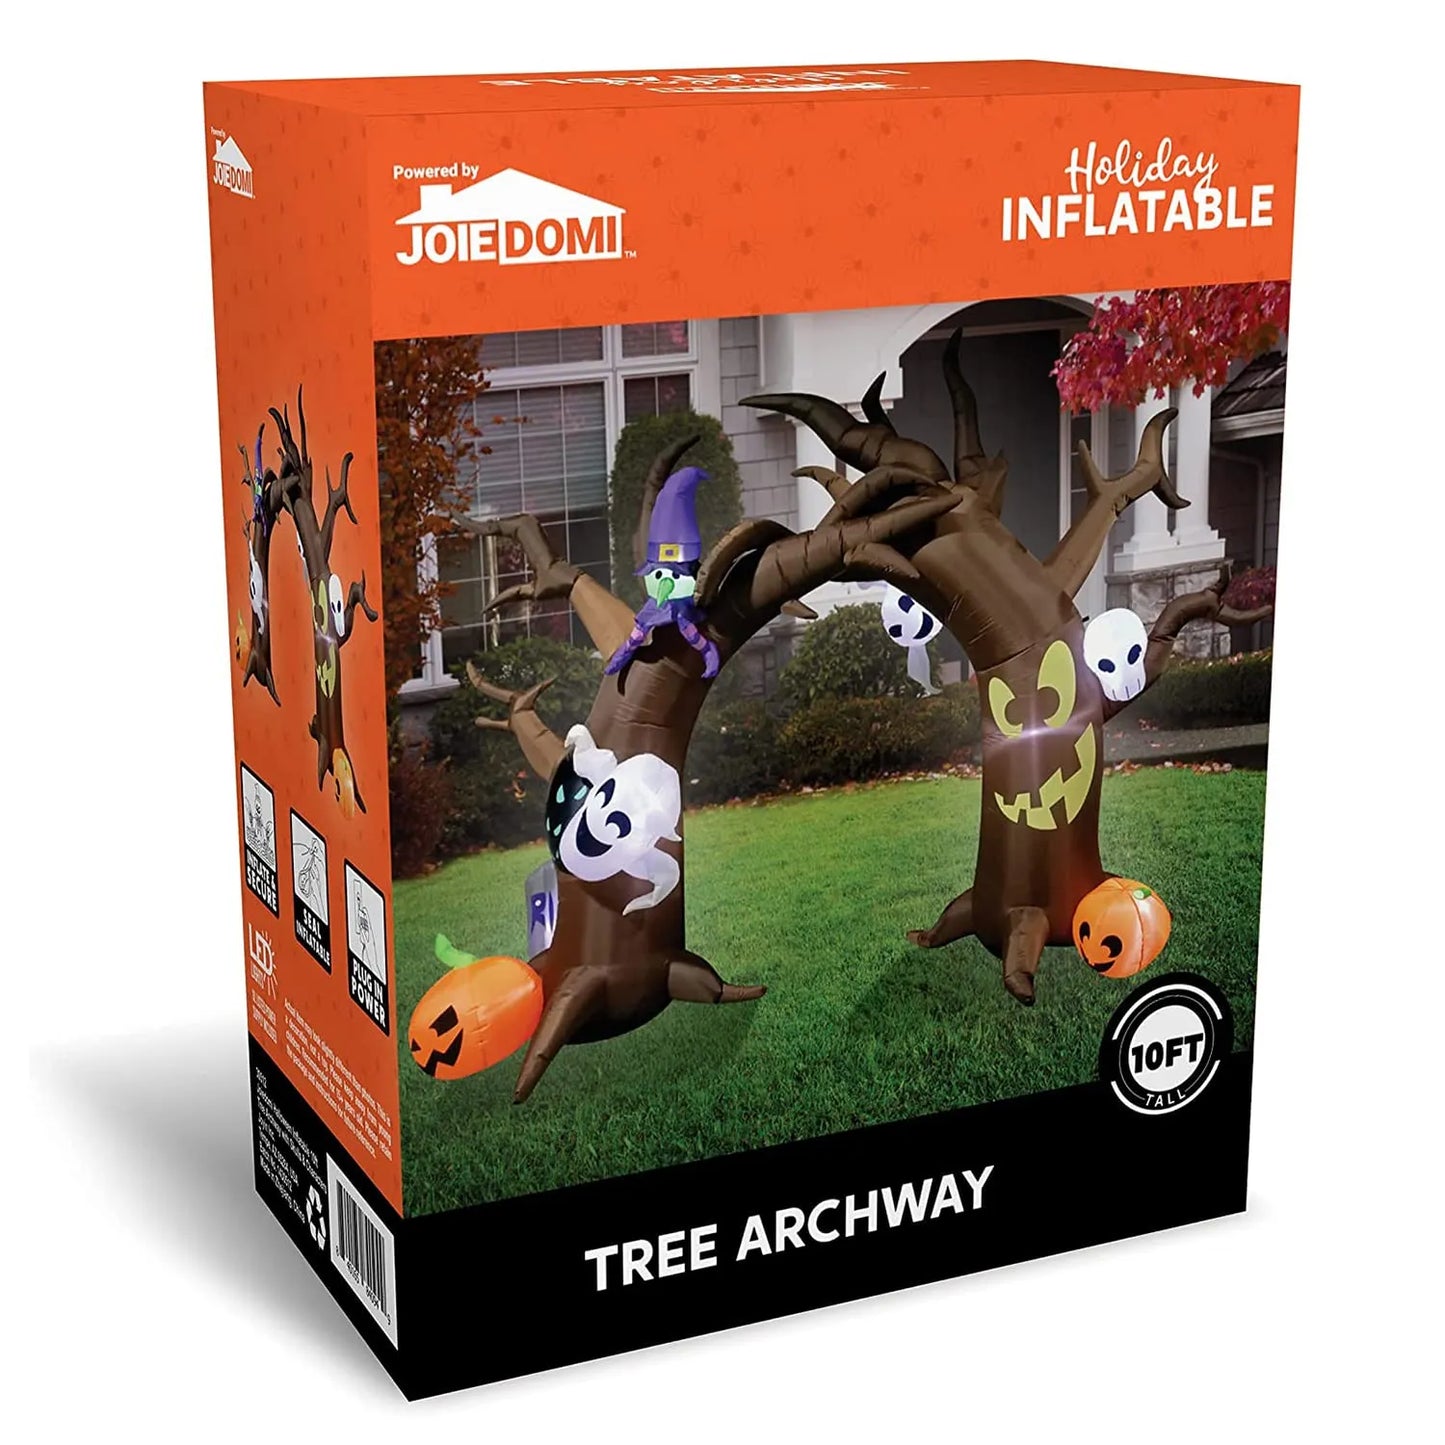 10ft Inflatable Tree Archway with Skulls and Characters - Joiedomi